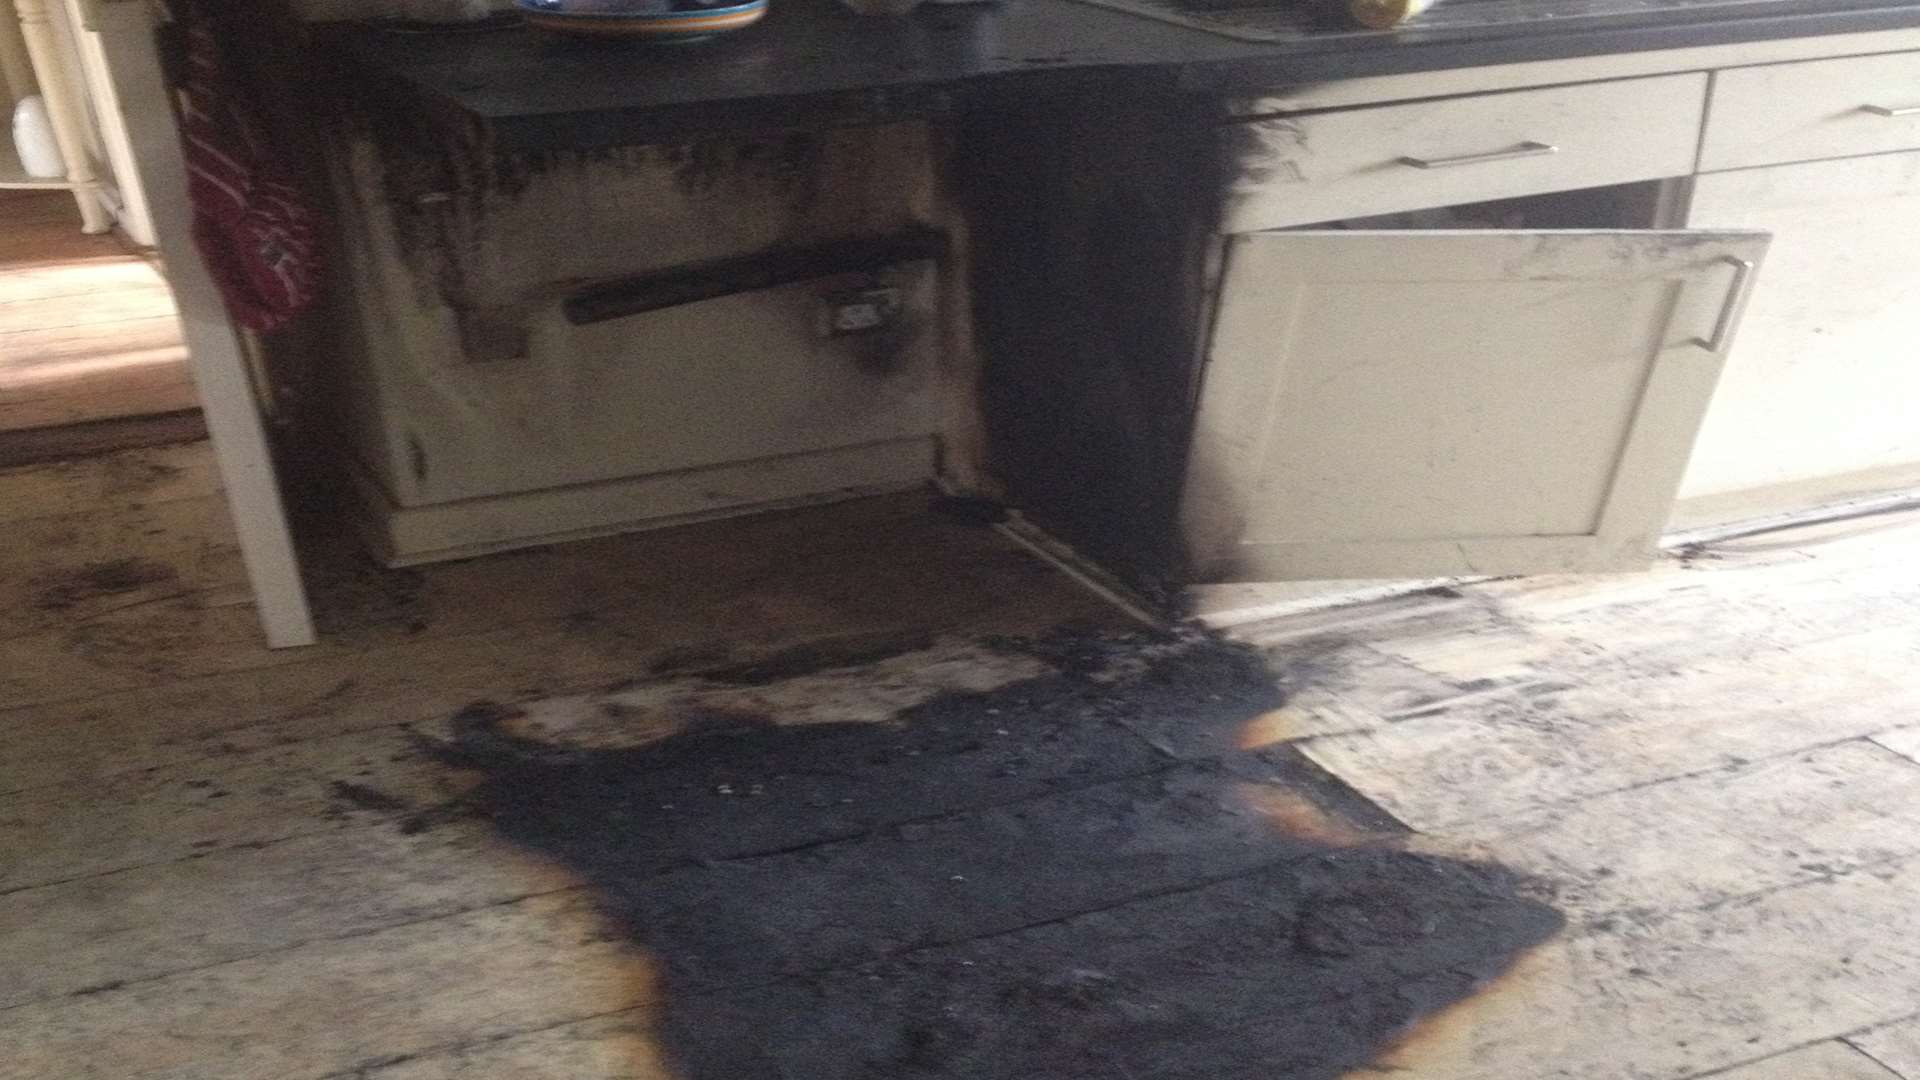 The scene of the dishwasher fire in Franklin Drive